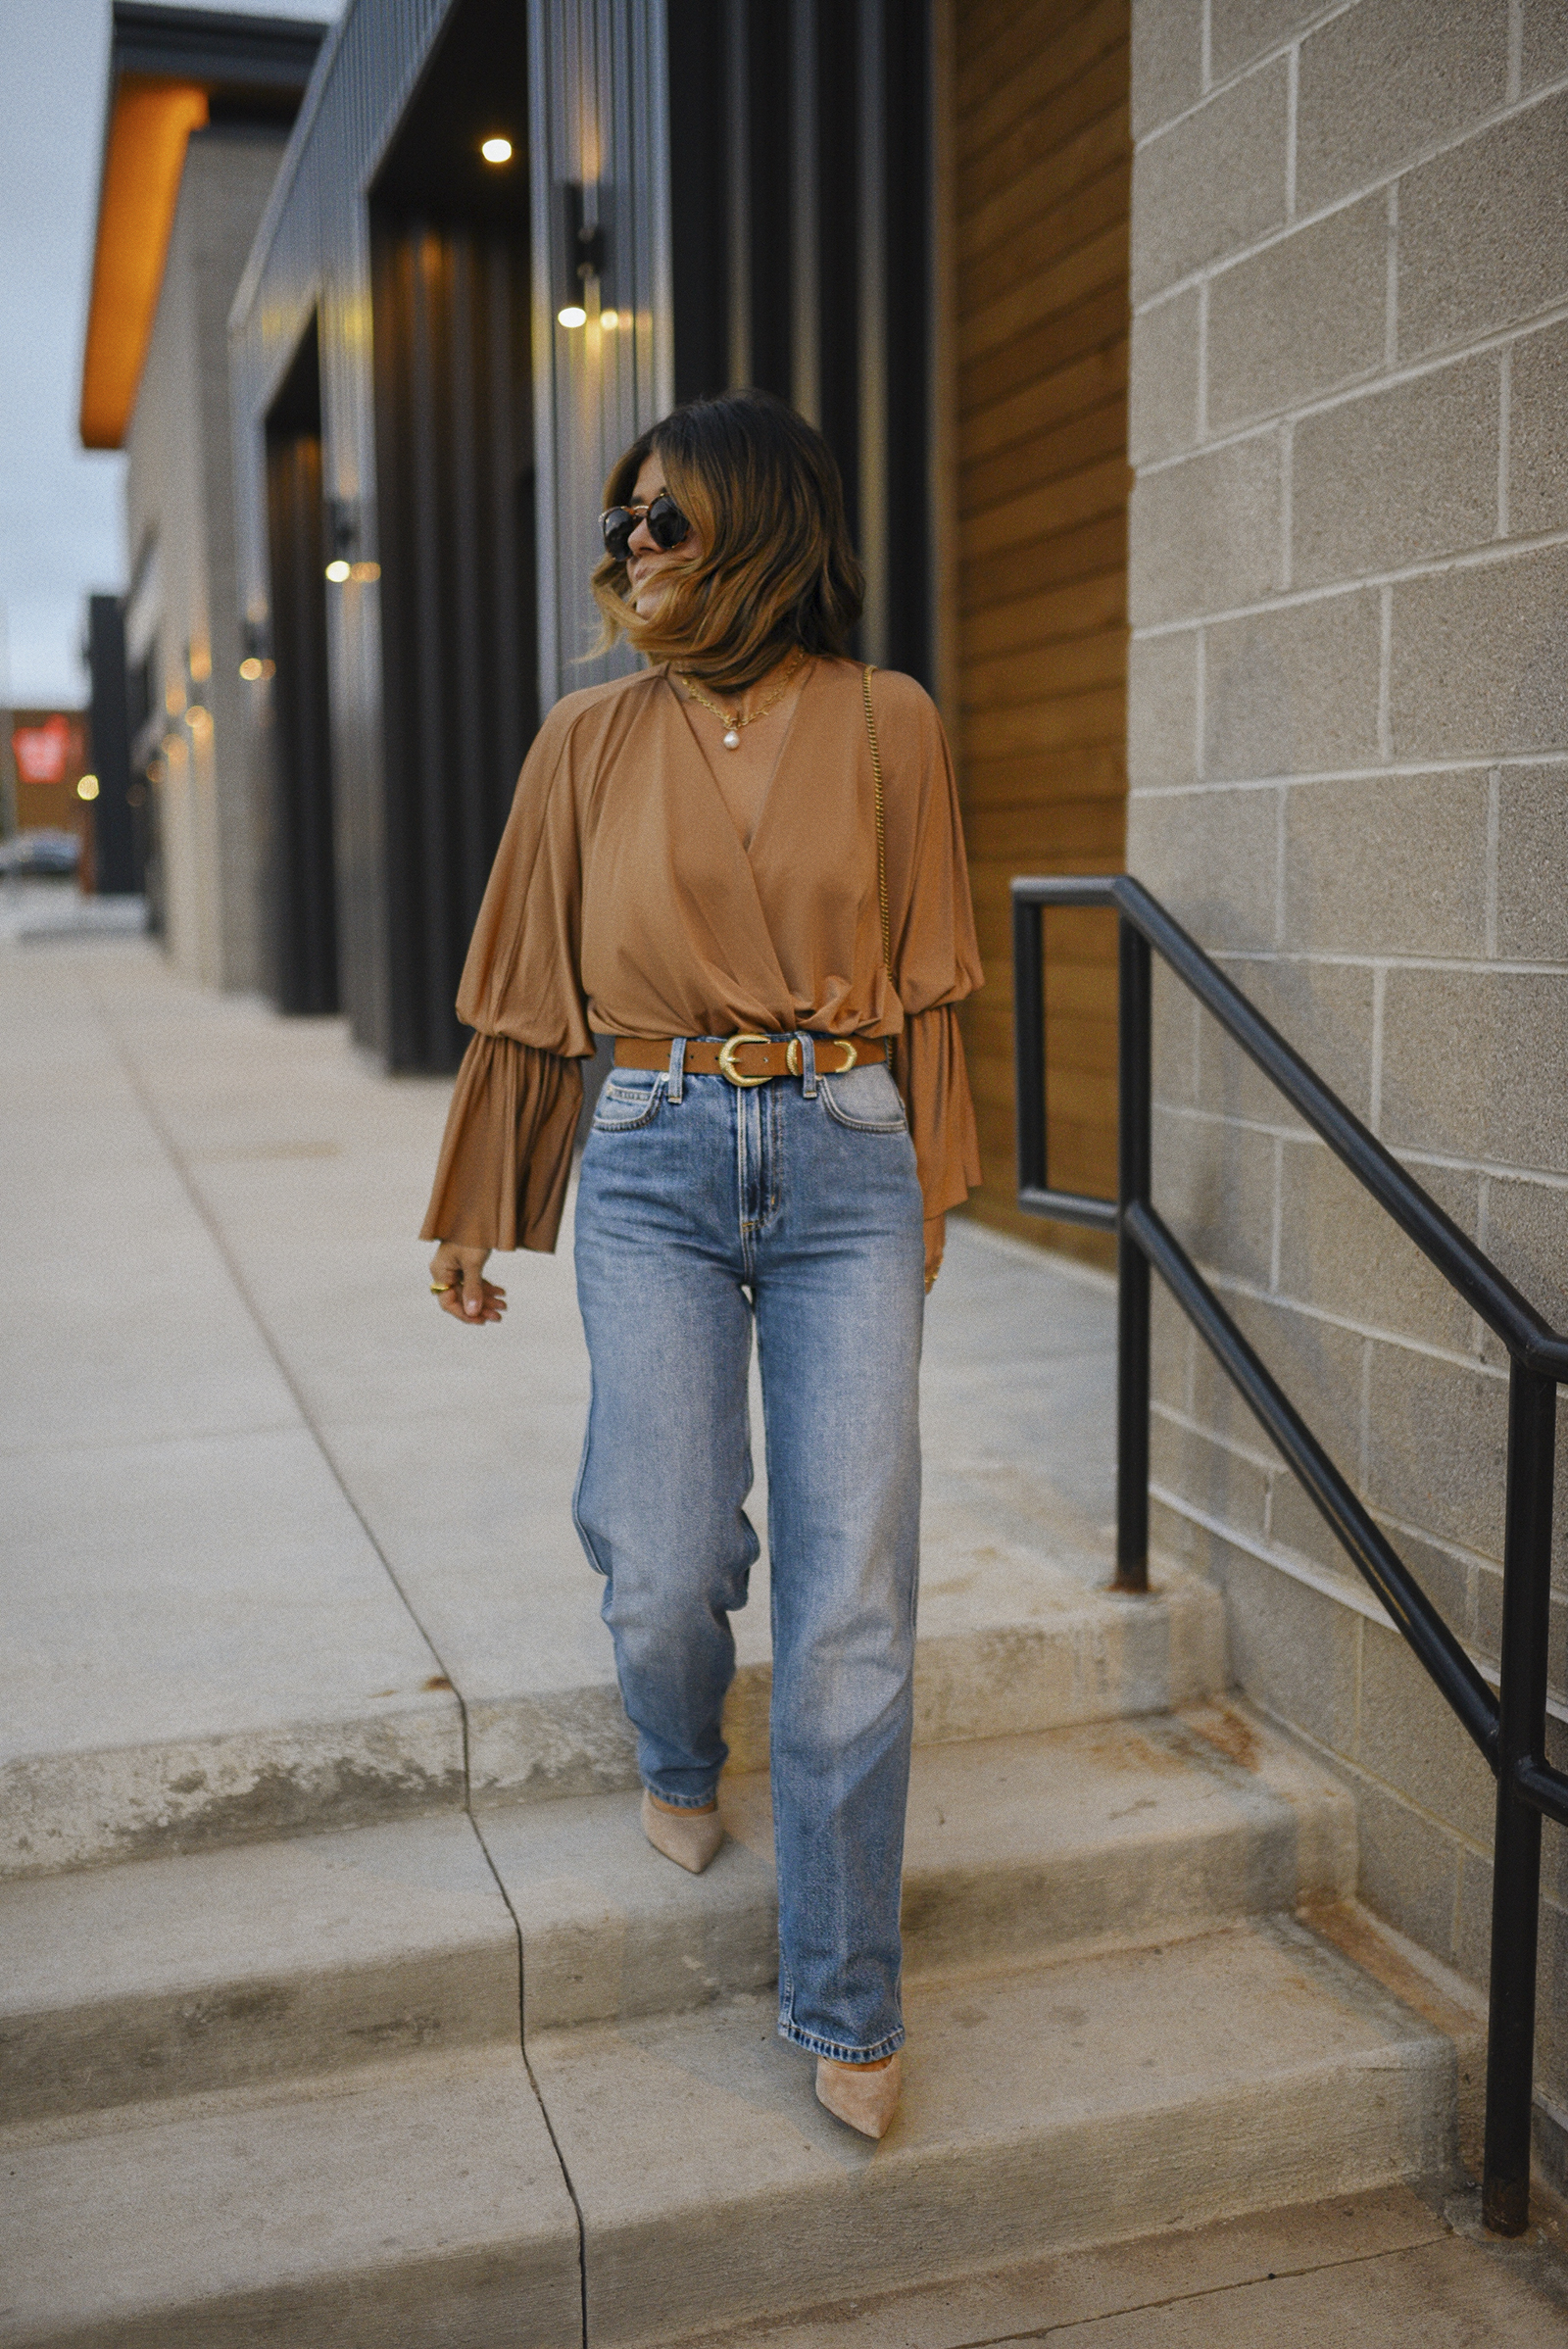 Carolina Hellal of Chic Talk wearing a fall outfit with a Express bodysuit, LEE jeans, Steve Madden suede pumps and Gucci handbag